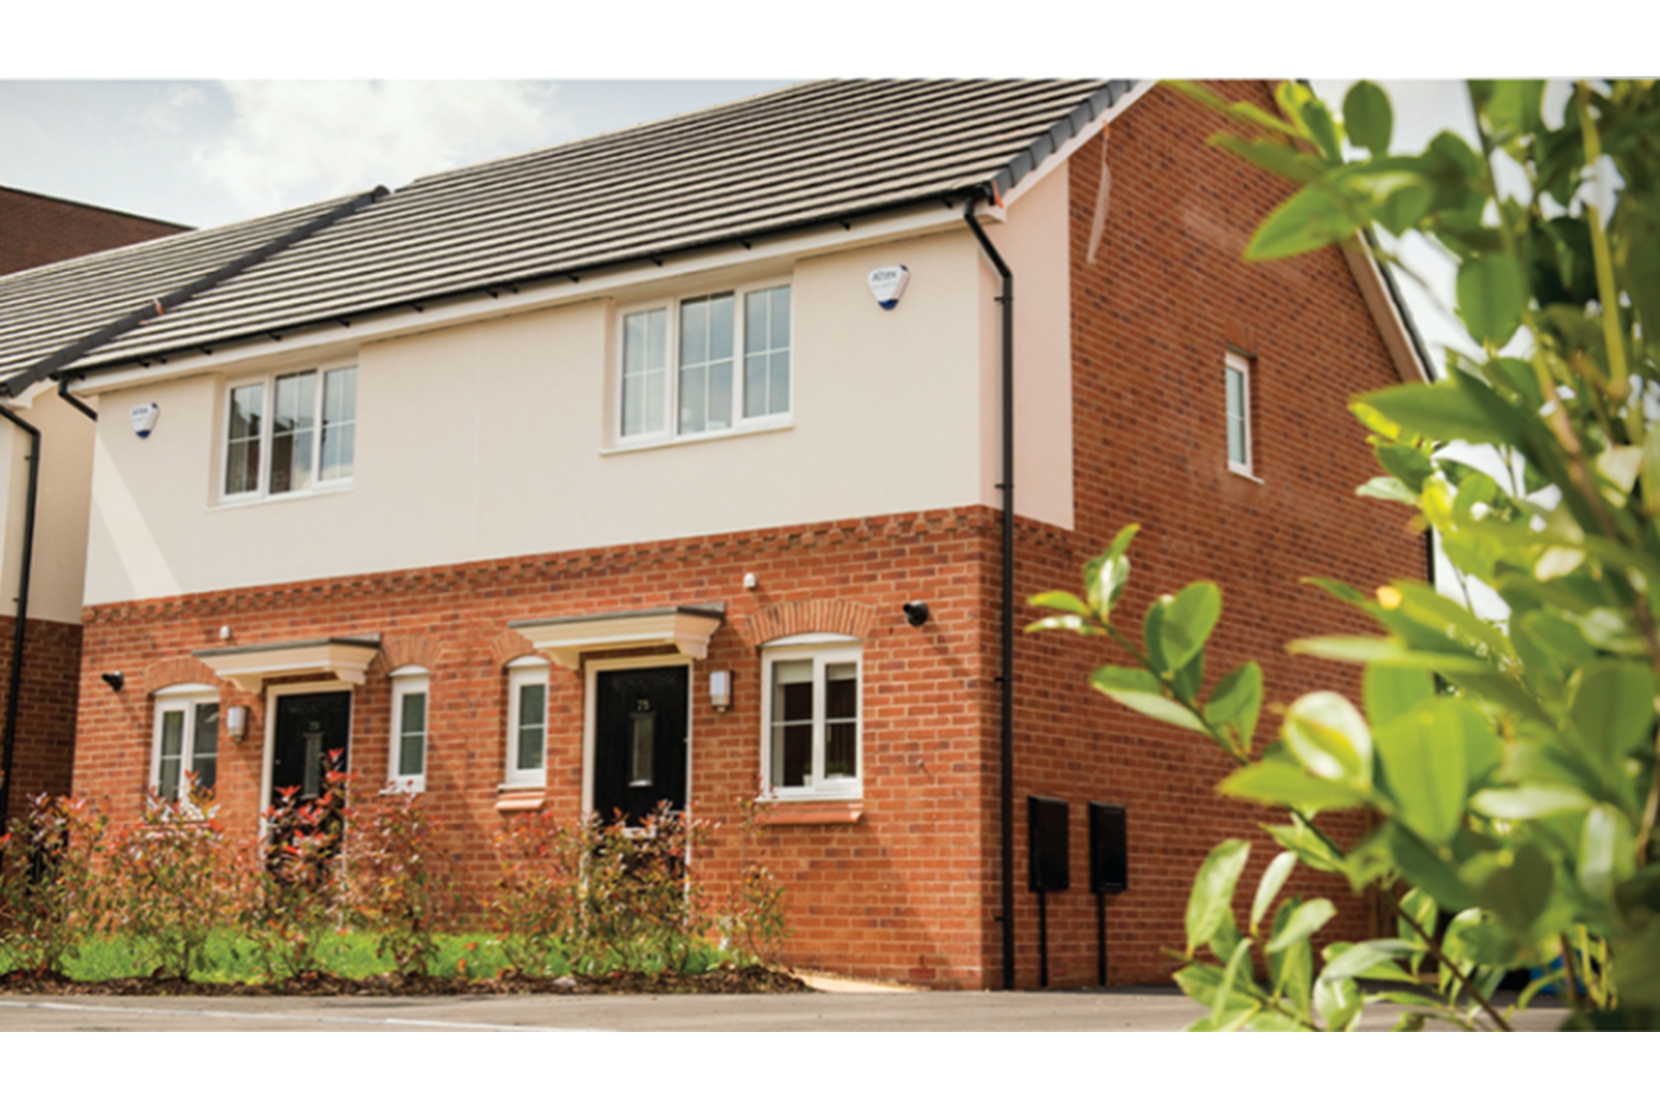 Houses to Rent by Simple Life in Dracan Village at Drakelow Park, Burton-on-Trent, DE15, development panoramic